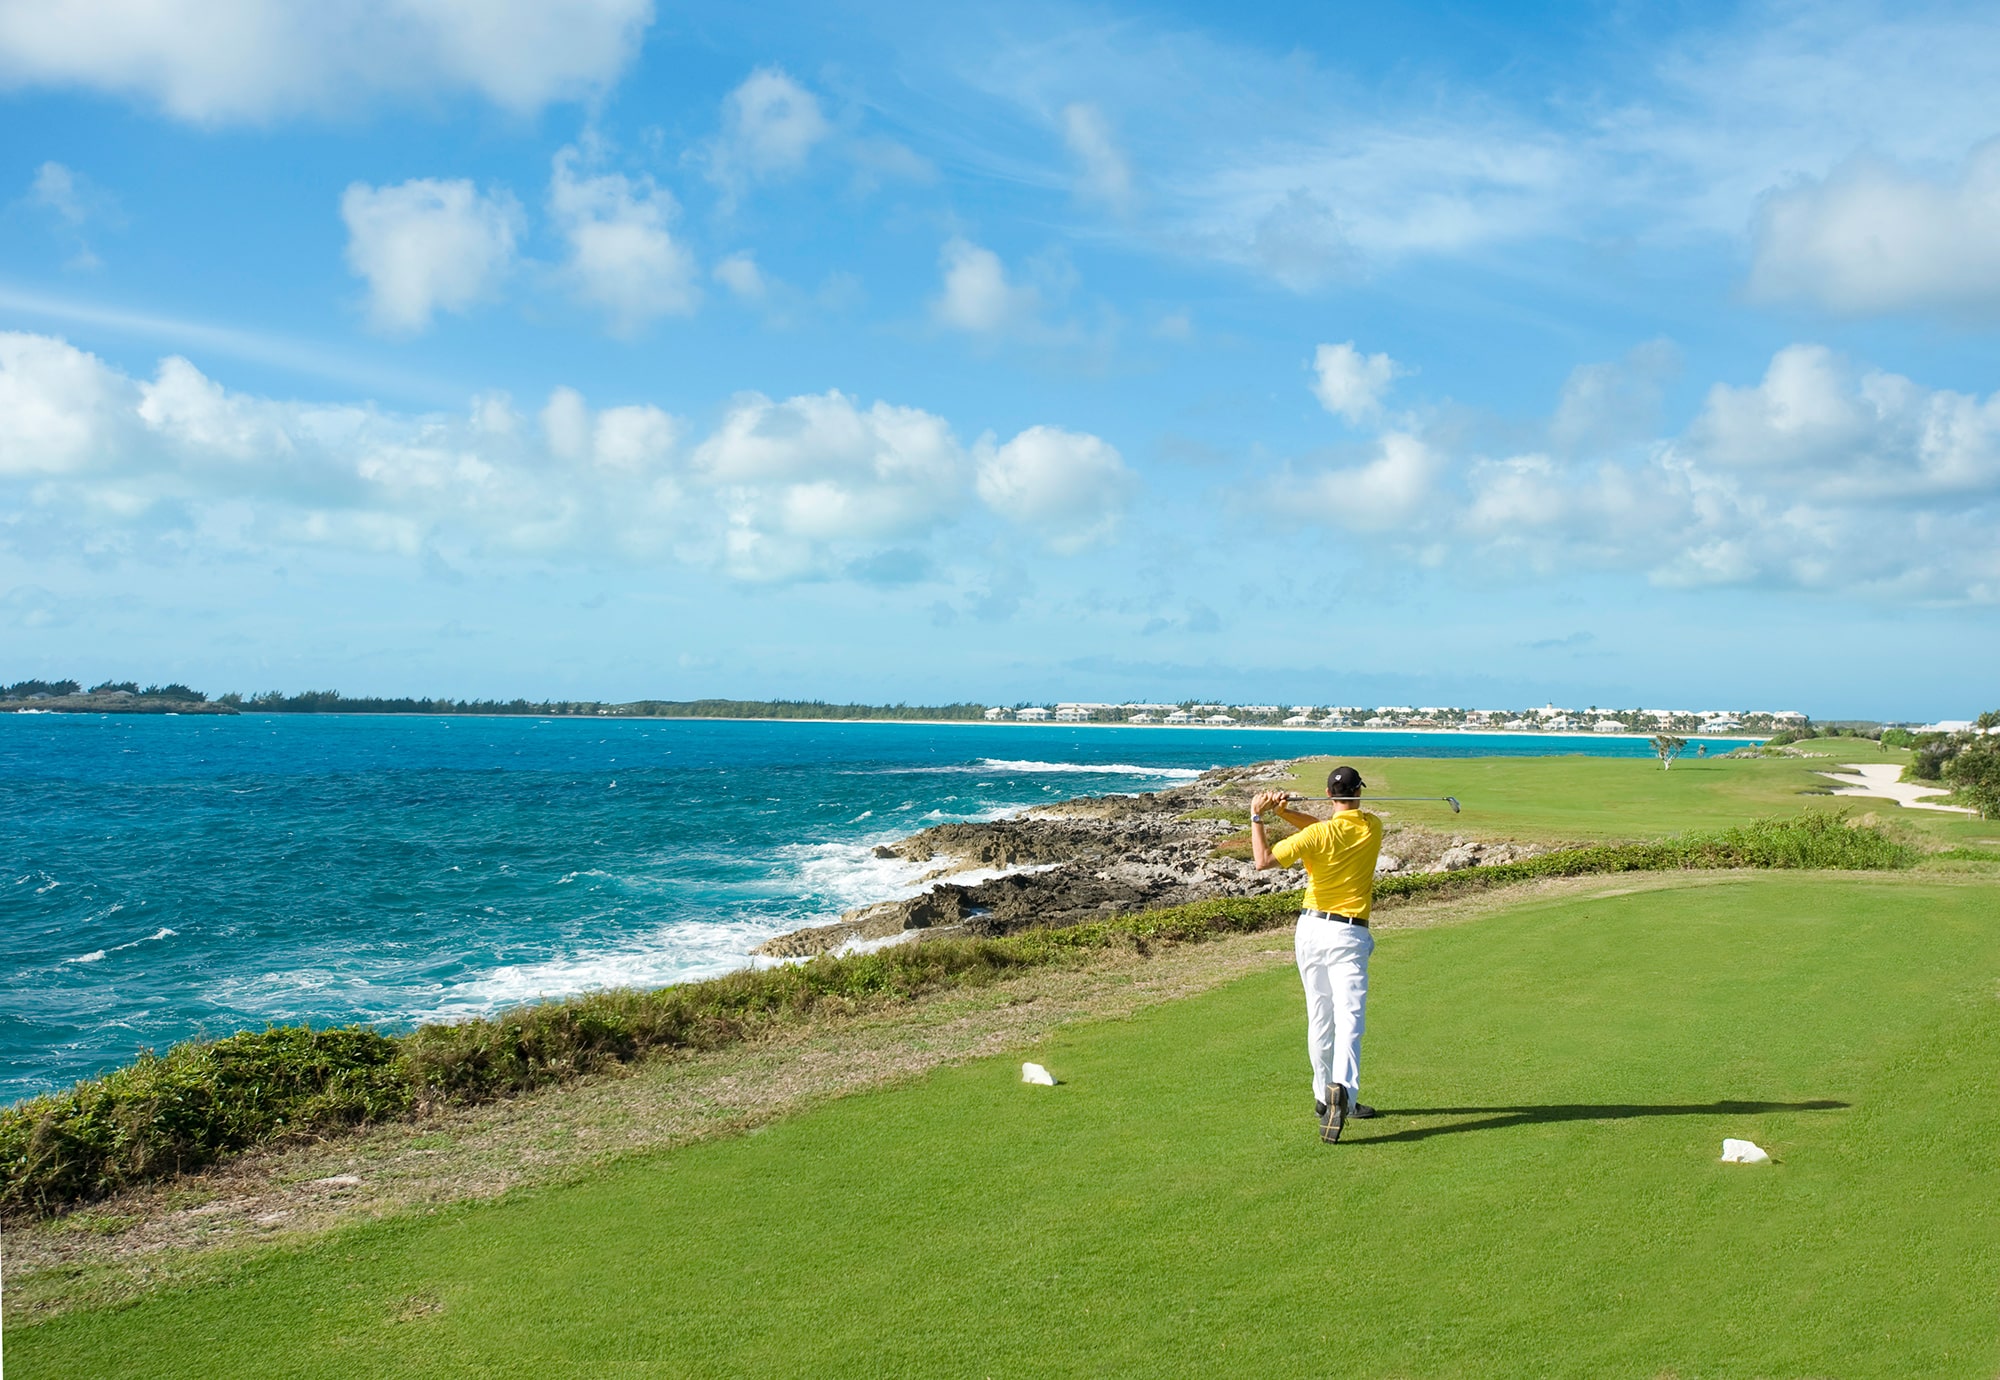 Things to do in the Bahamas: Golf at Sandals Emerald Bay